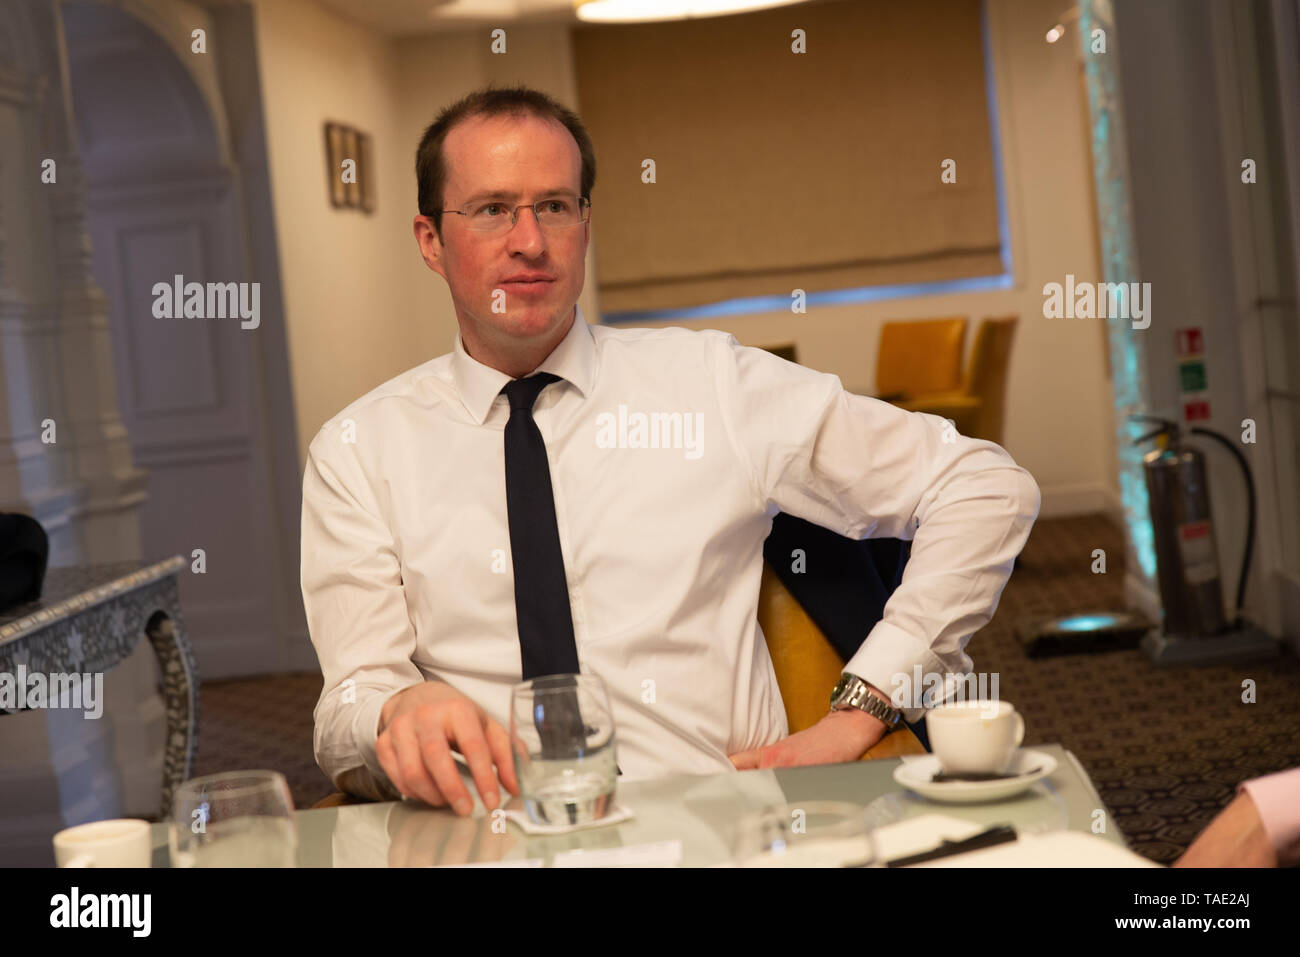 Matthew Elliott is a British political strategist and lobbyist involved - with . Dominic Cummings - in the Brexit campaign. Stock Photo